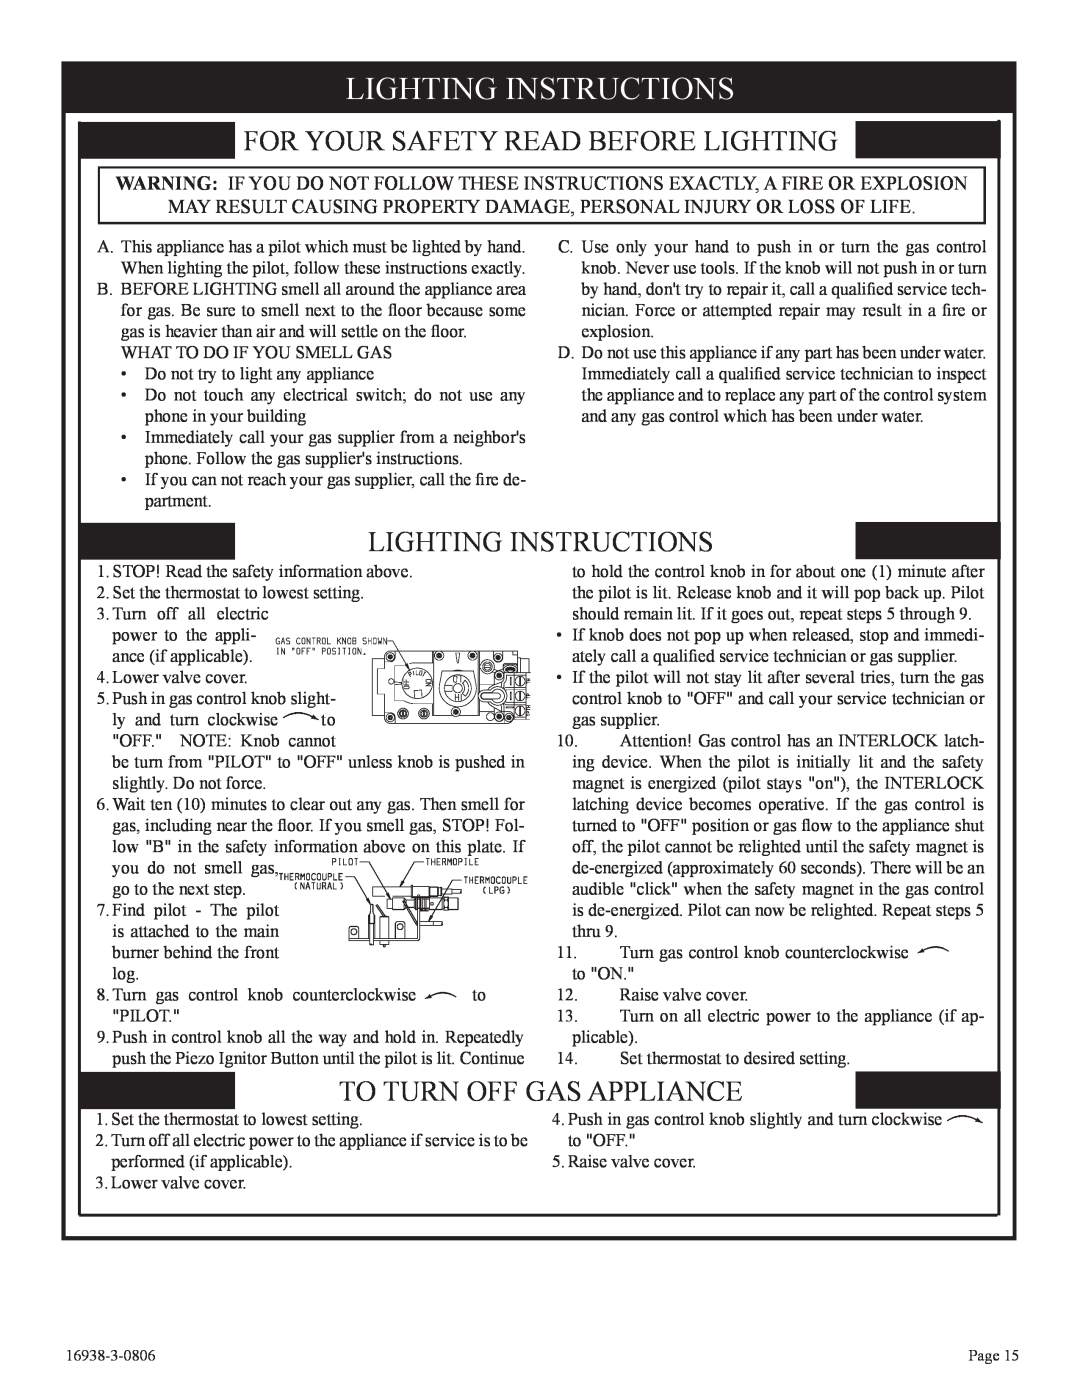 Empire Comfort Systems CIVF-25-21 Lighting Instructions, For Your Safety Read Before Lighting, To Turn Off Gas Appliance 